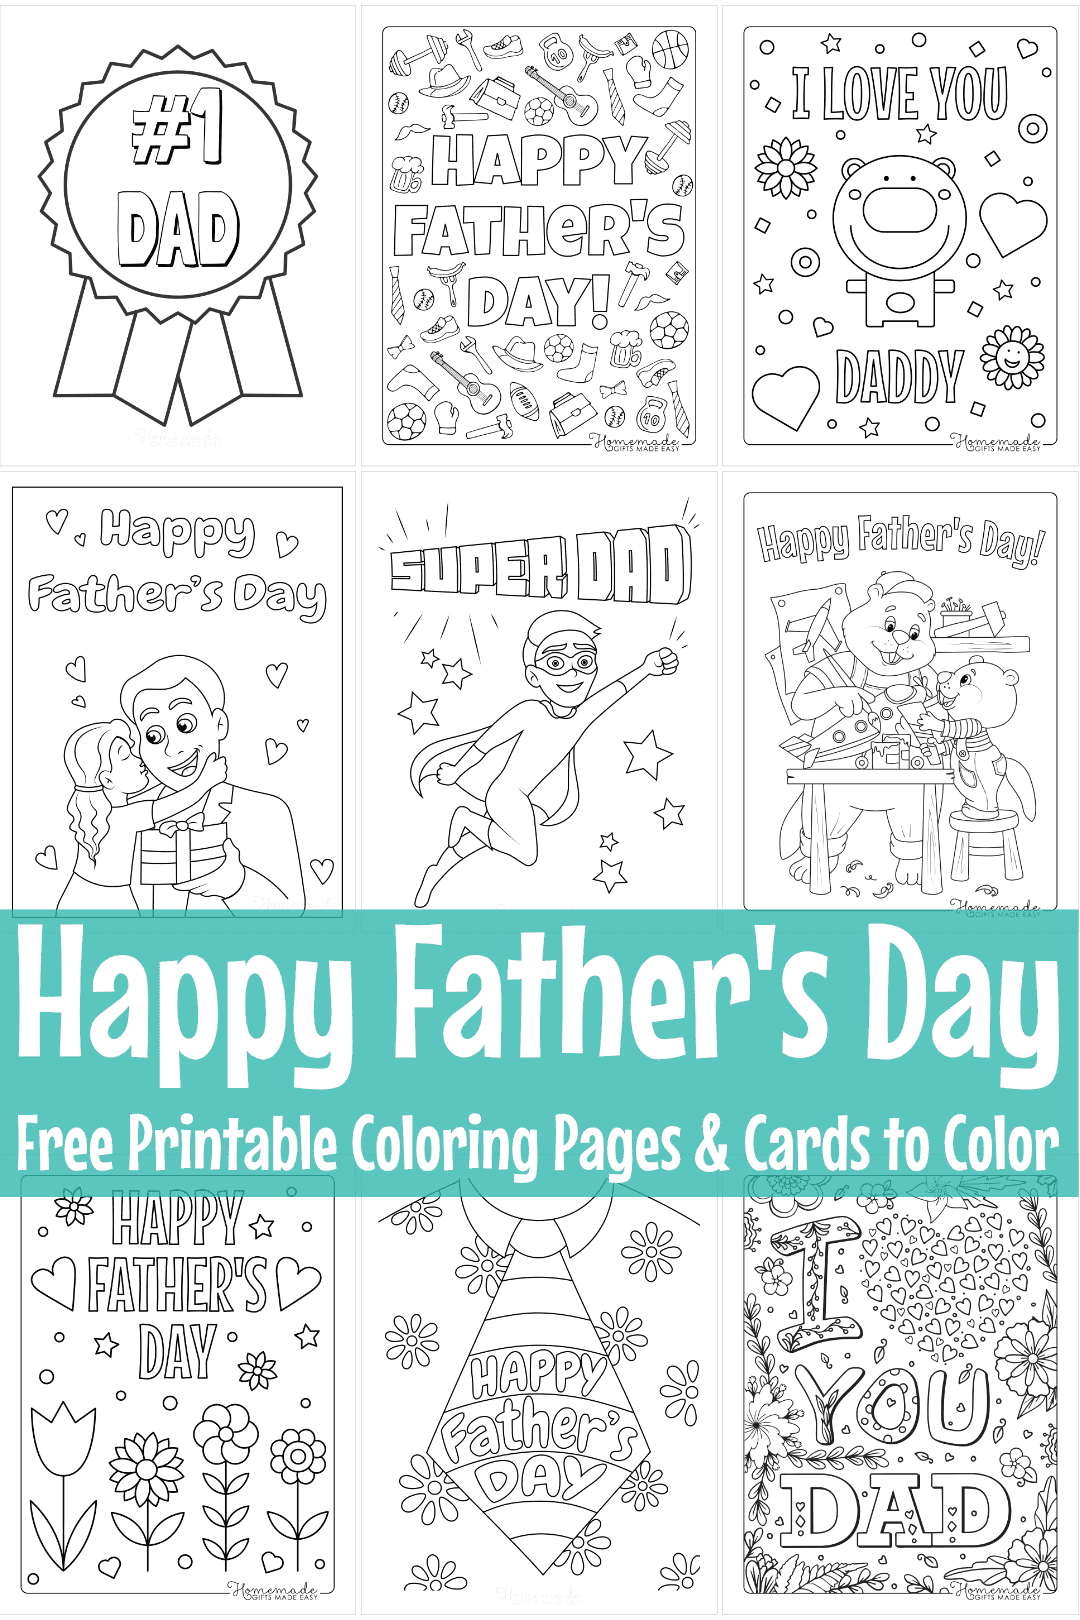 Father's Day I feel bad for other people V2 Funny Greeting Card 